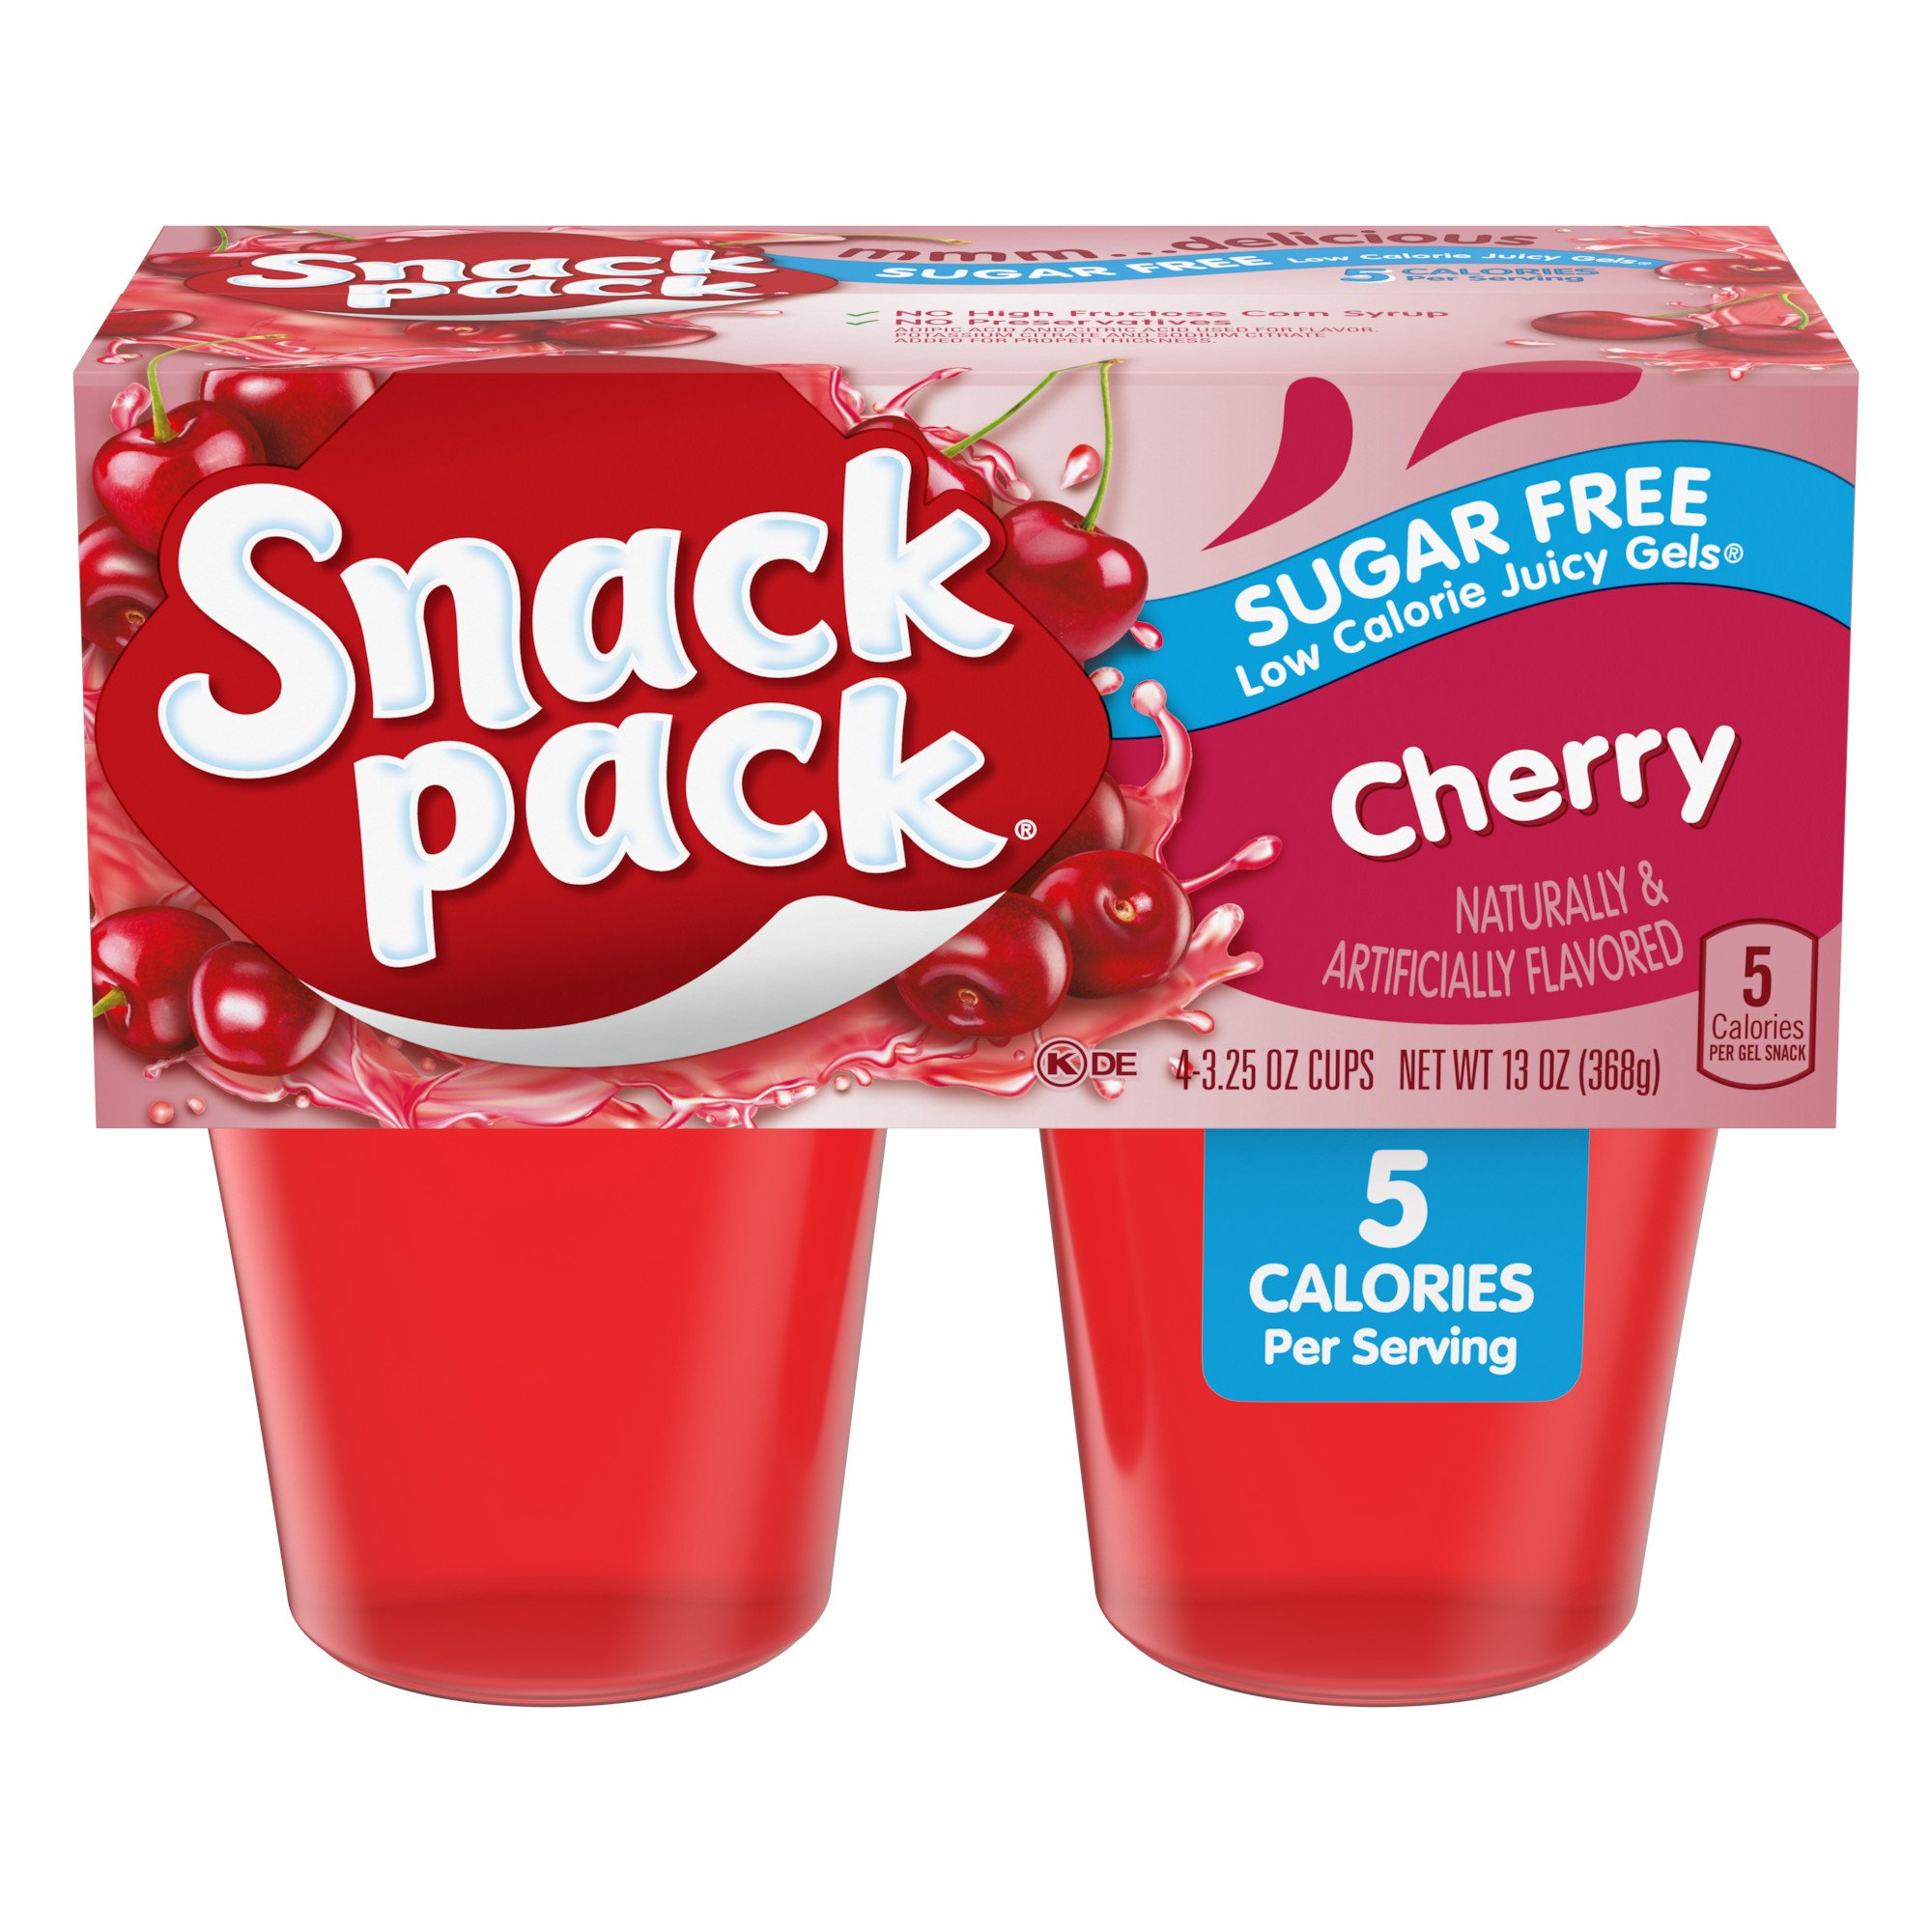 Hunts Snack Pack Sugar Free Cherry Juicy Gels Cups Shop Pudding 